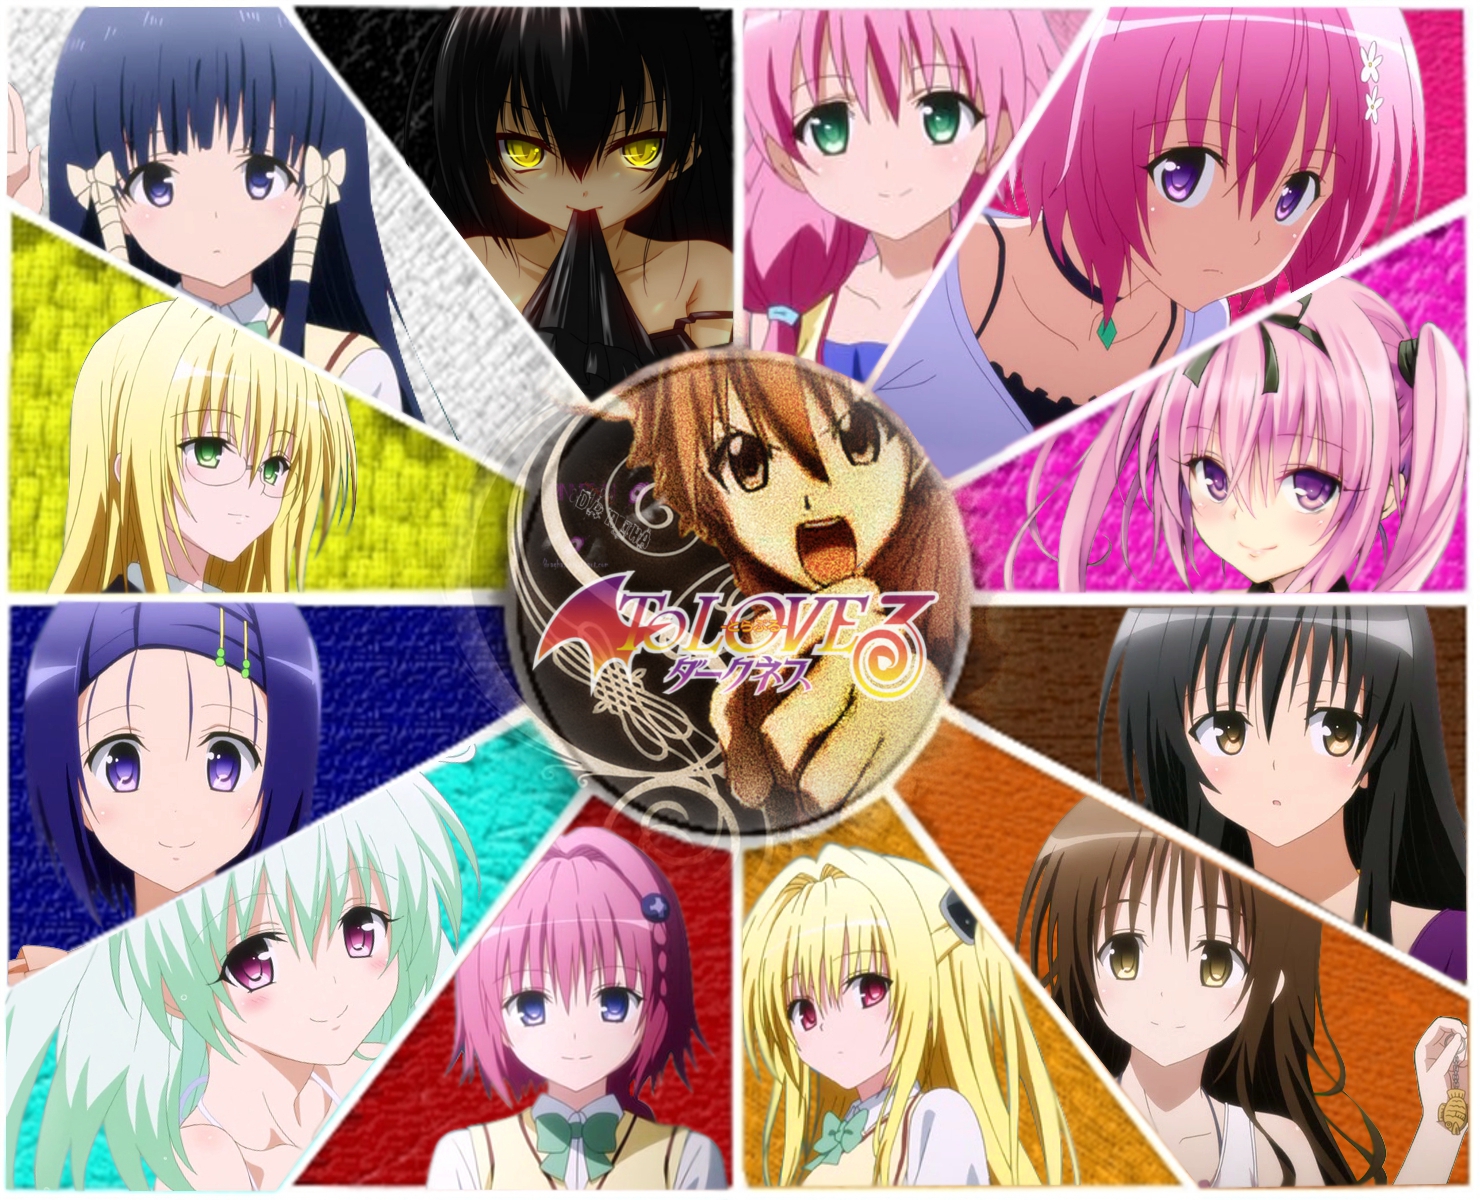 View, Download, Rate, and Comment on this To Love-Ru Art. 